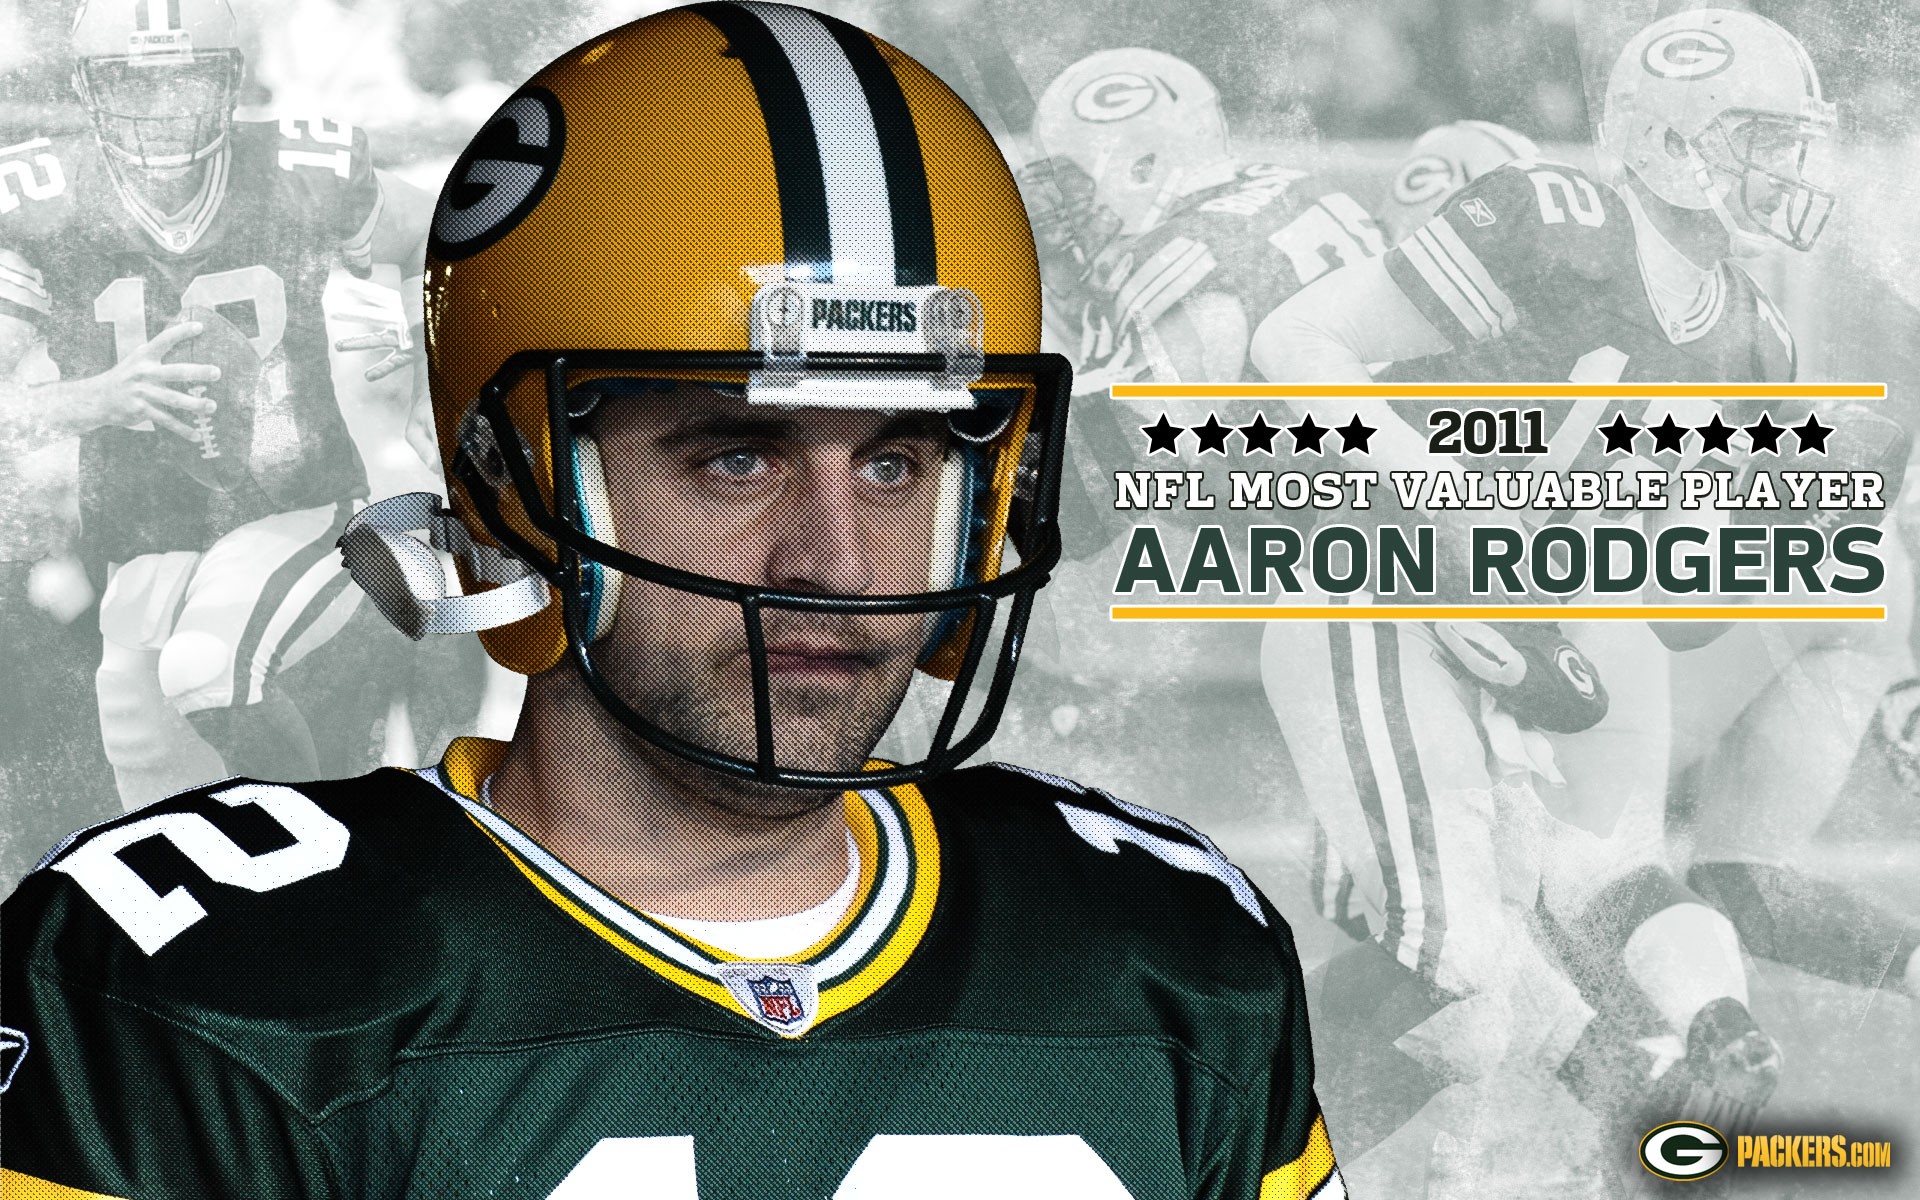 Aaron Rodgers wallpaper ·① Download free full HD backgrounds for